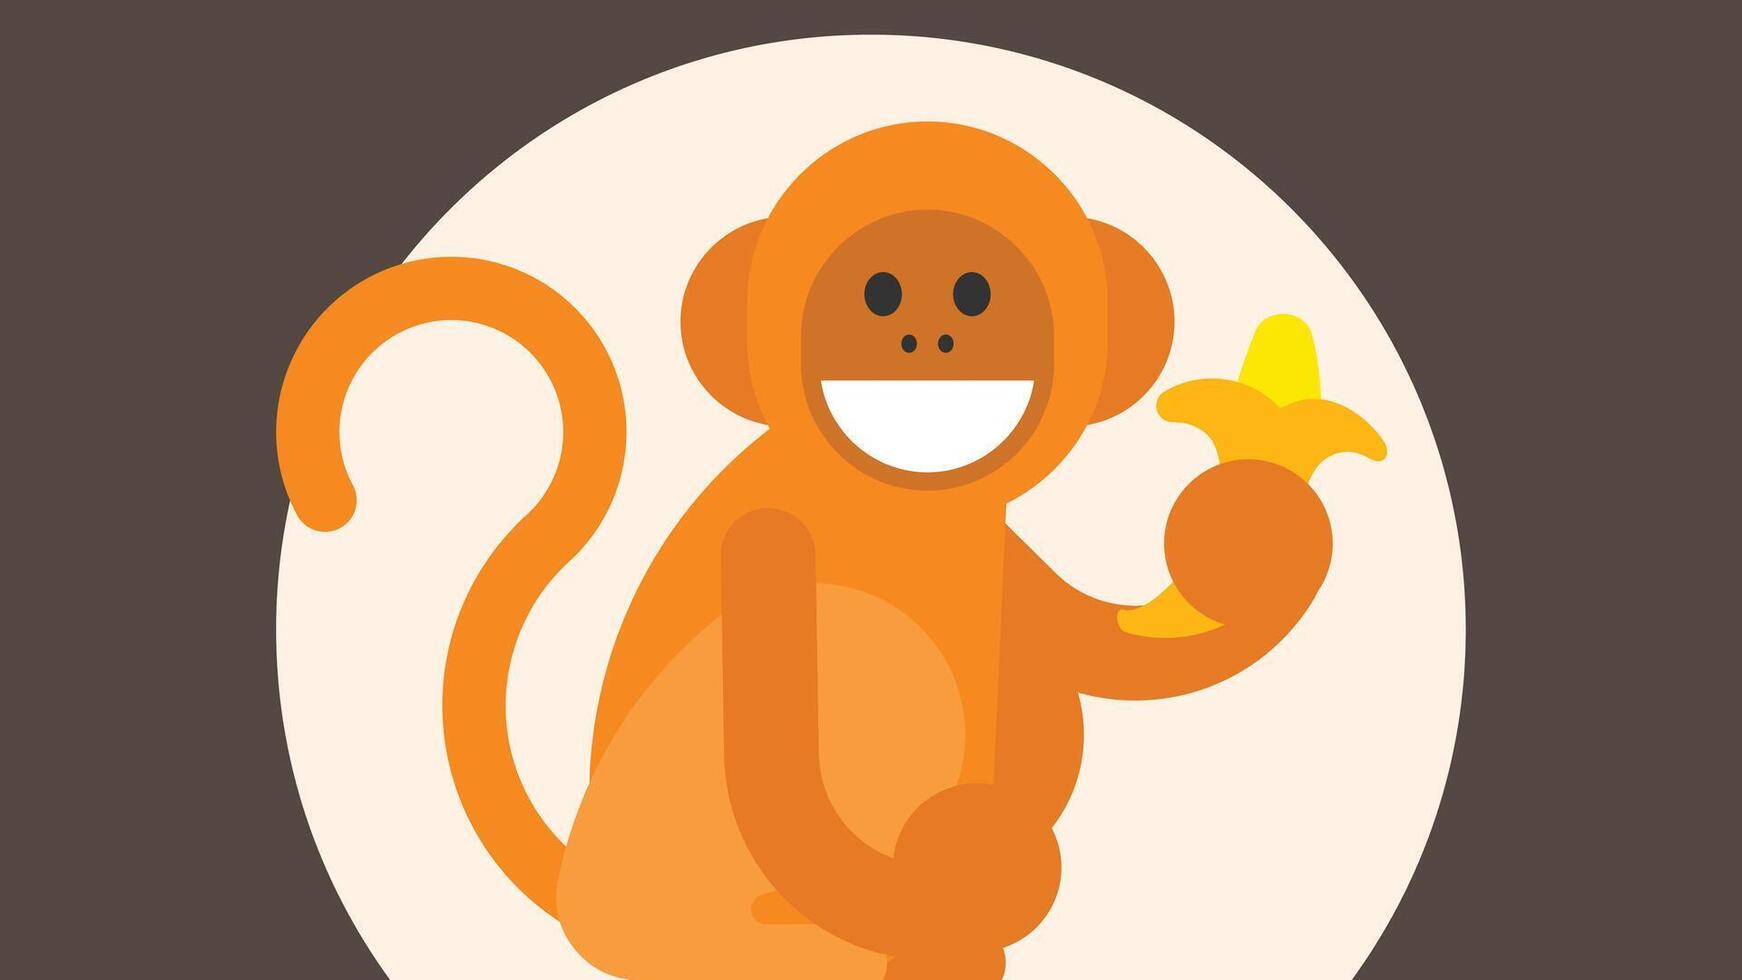 Monkey in a circus playing with balls illustration vector